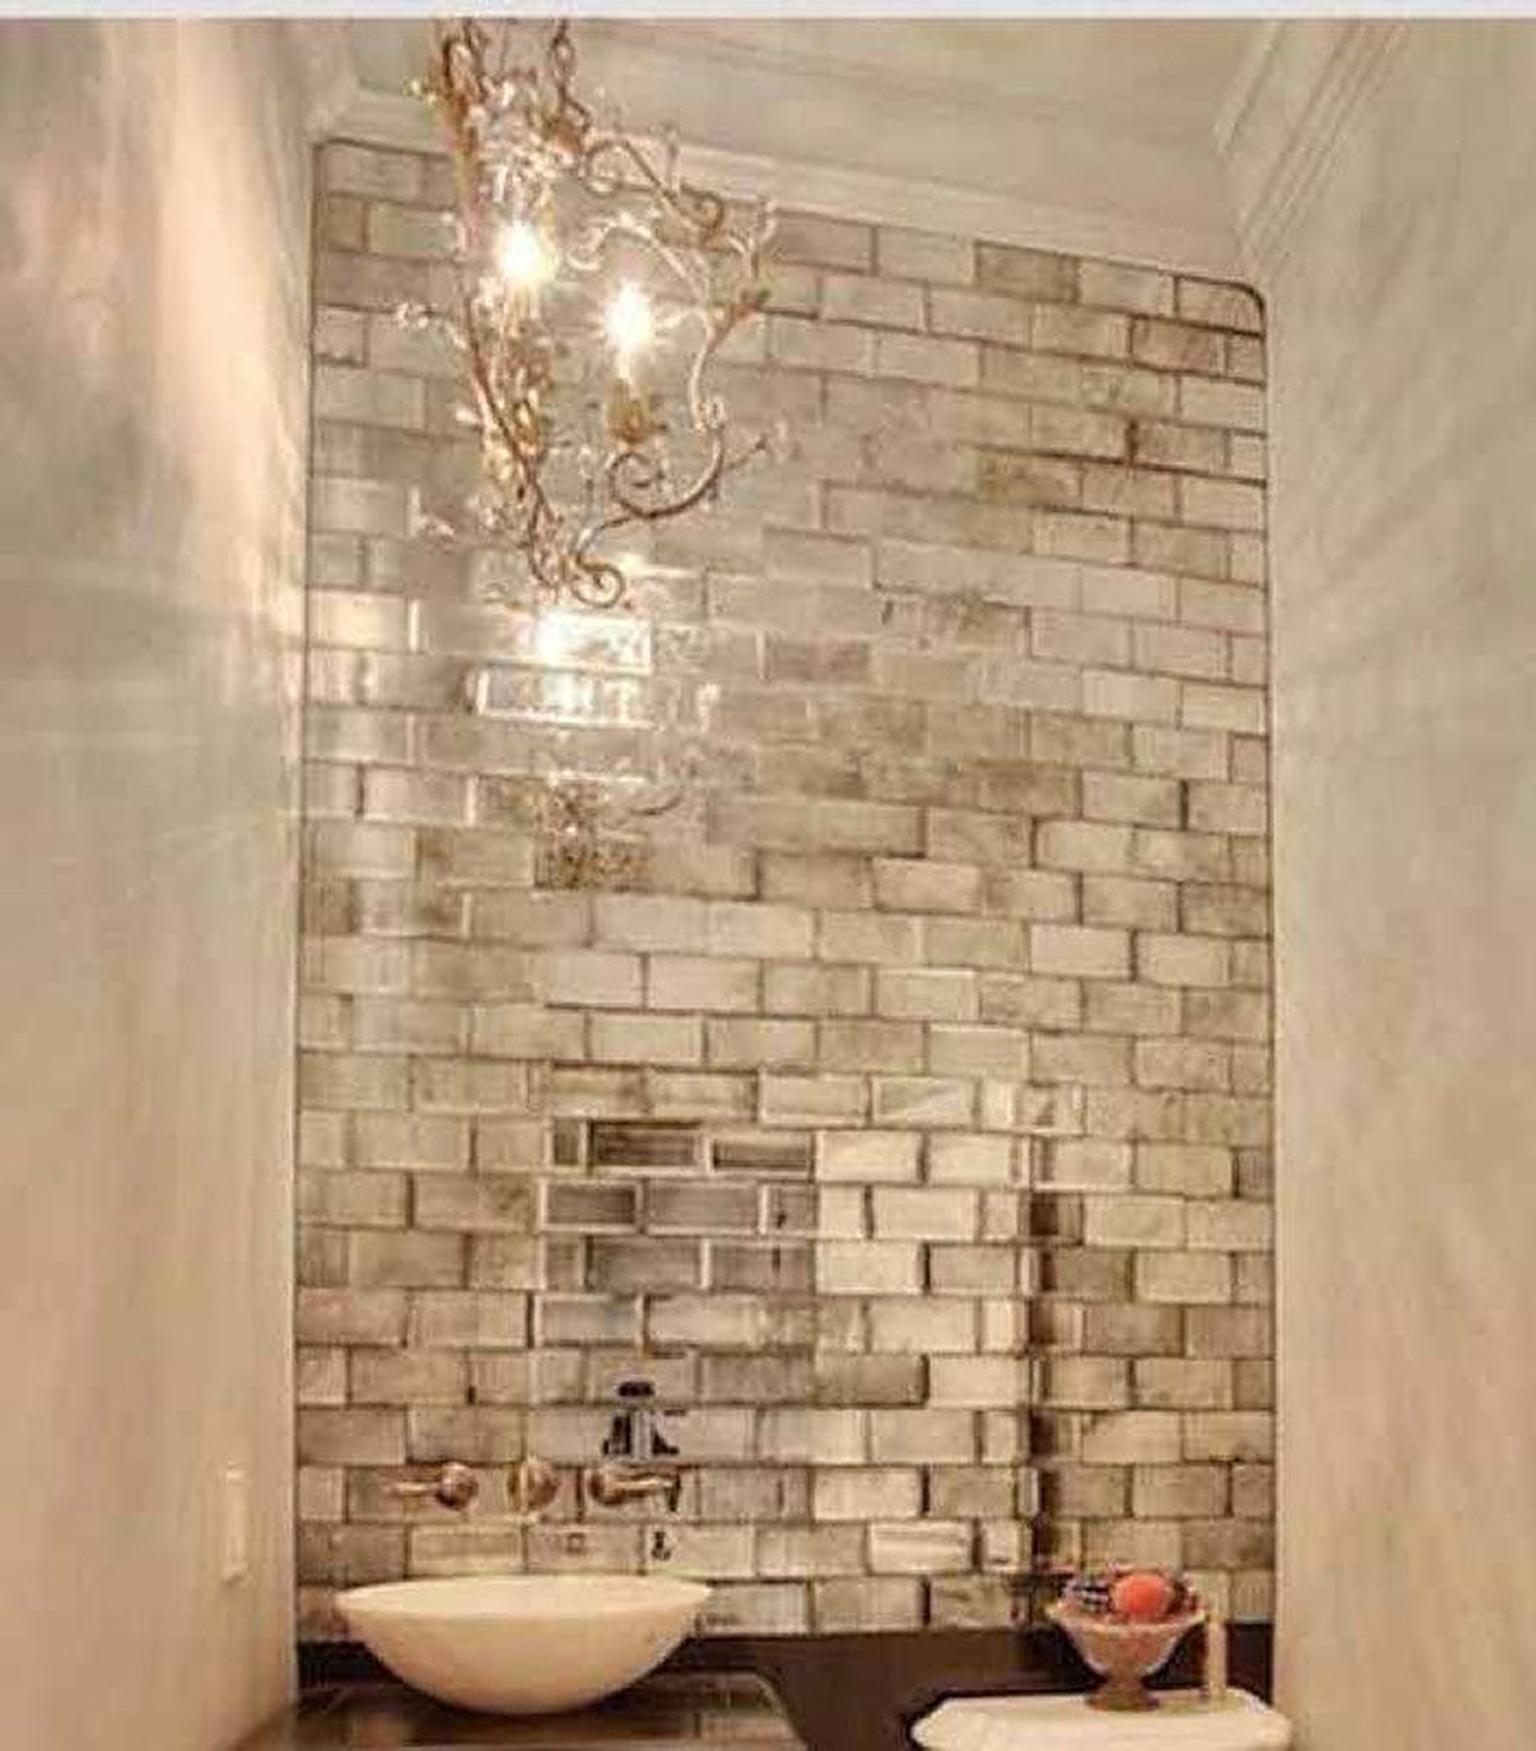 Beveled Luxury Mirror Wall Tiles In, Beveled Mirror Tiles For Walls